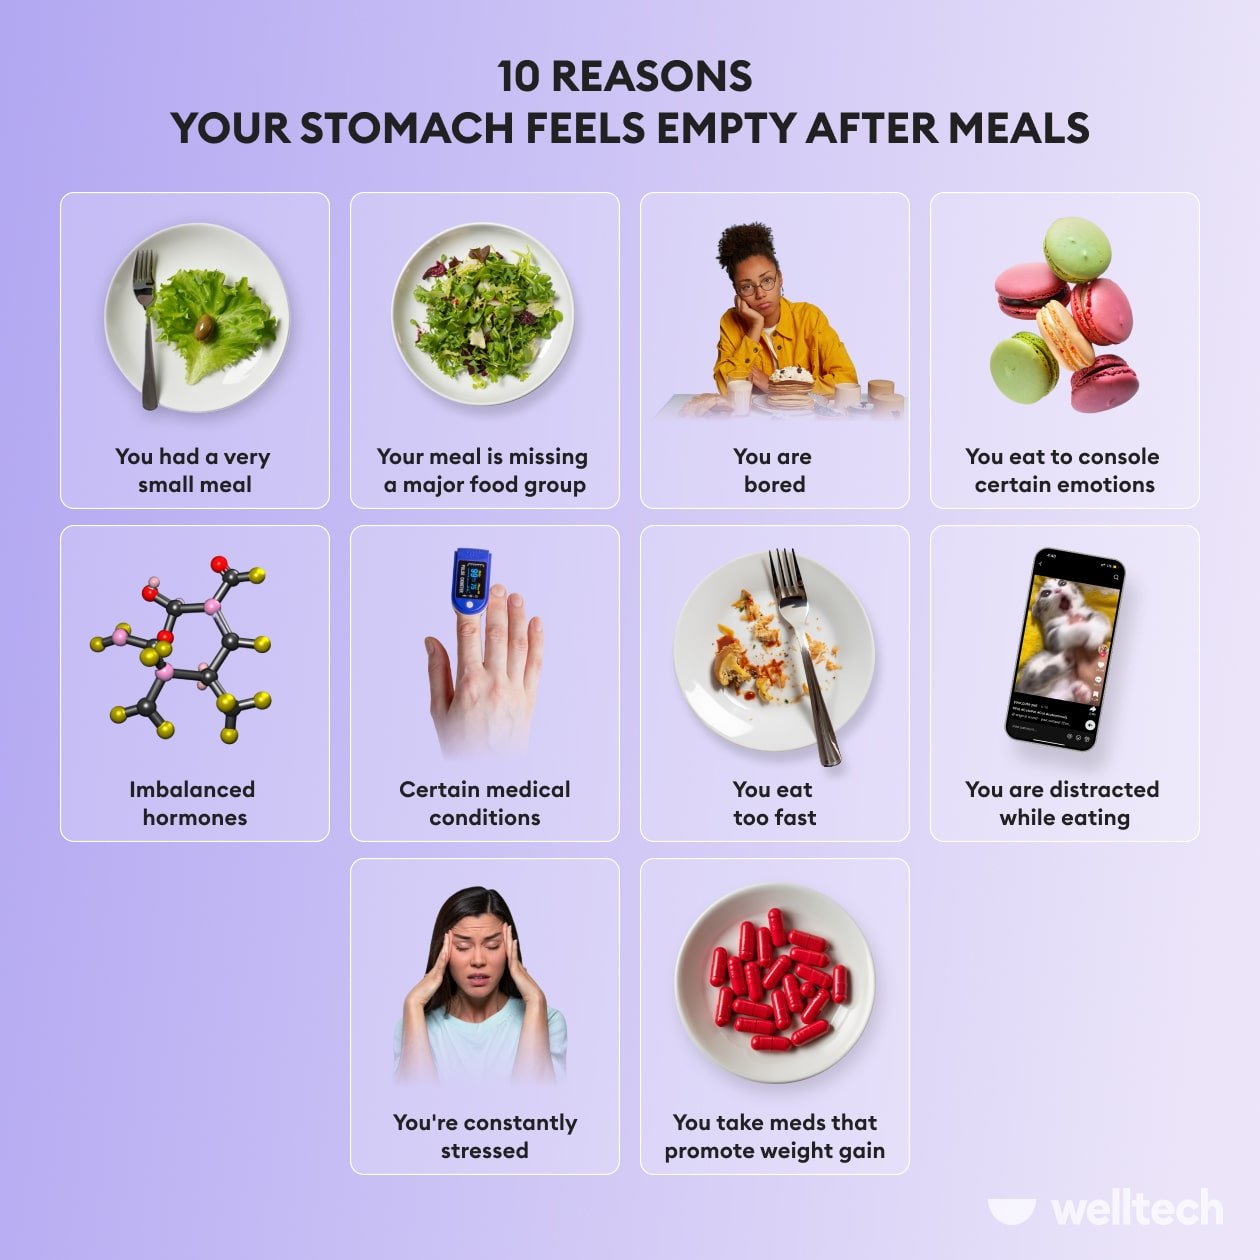 An infographic titled '10 Reasons Your Stomach Feels Empty After Meals' with a purple background. Each reason is depicted with a corresponding image and text in individual squares. 1. 'You had a very small meal' shows a plate with a few lettuce leaves. 2. 'Your meal is missing a major food group' shows a plate with a green salad. 3. 'You are bored' displays a woman resting her head on her hand, looking uninterested. 4. 'You eat to console certain emotions' pairs with colorful macarons. 5. 'Imbalanced hormones' is represented by a molecule structure. 6. 'Certain medical conditions' has an image of a hand holding a glucometer. 7. 'You eat too fast' shows a plate with a few bites of food left. 8. 'You are distracted while eating' features a smartphone displaying a video of a dog. 9. 'You're constantly stressed' is illustrated by a stressed woman with her hands on her head. 10. 'You take meds that promote weight gain' shows a plate with red capsules. The logo 'welltech' is at the bottom right.